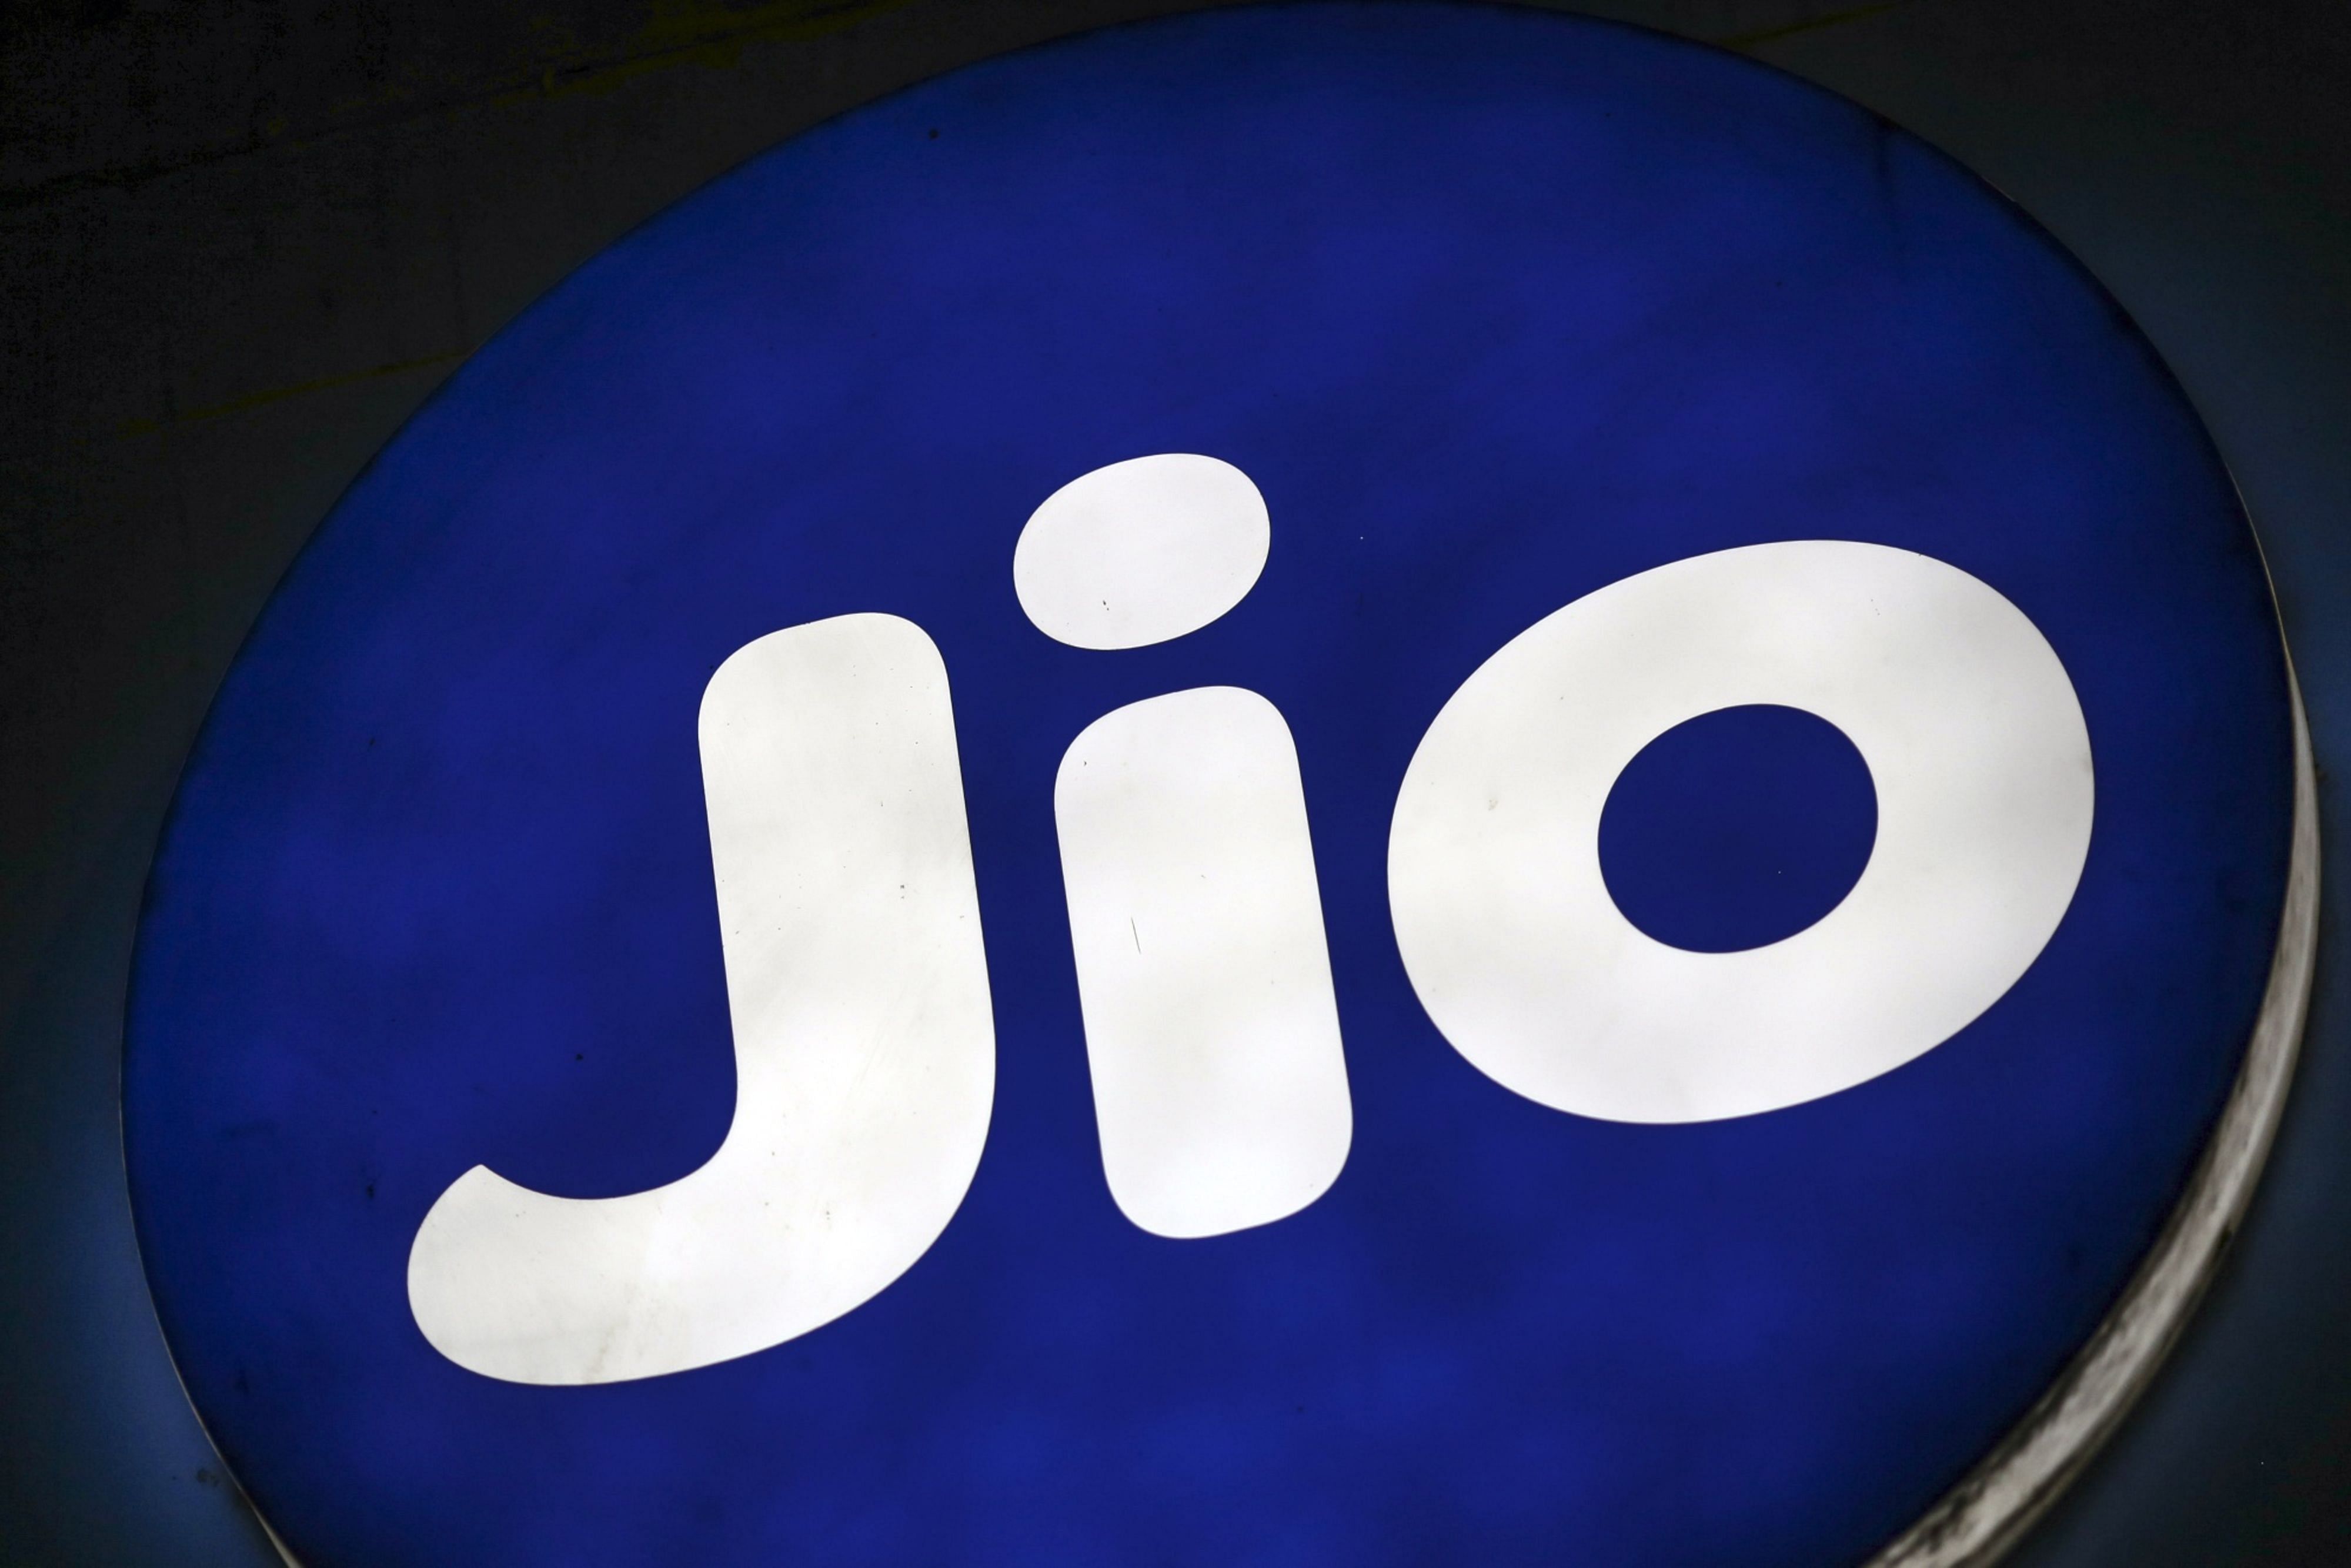 The U.S. social media giant’s $5.7 billion investment in Reliance’s digital unit is the biggest among a string of investments amounting to $13.7 billion into Jio Platforms Ltd., controlled by Mukesh Ambani.